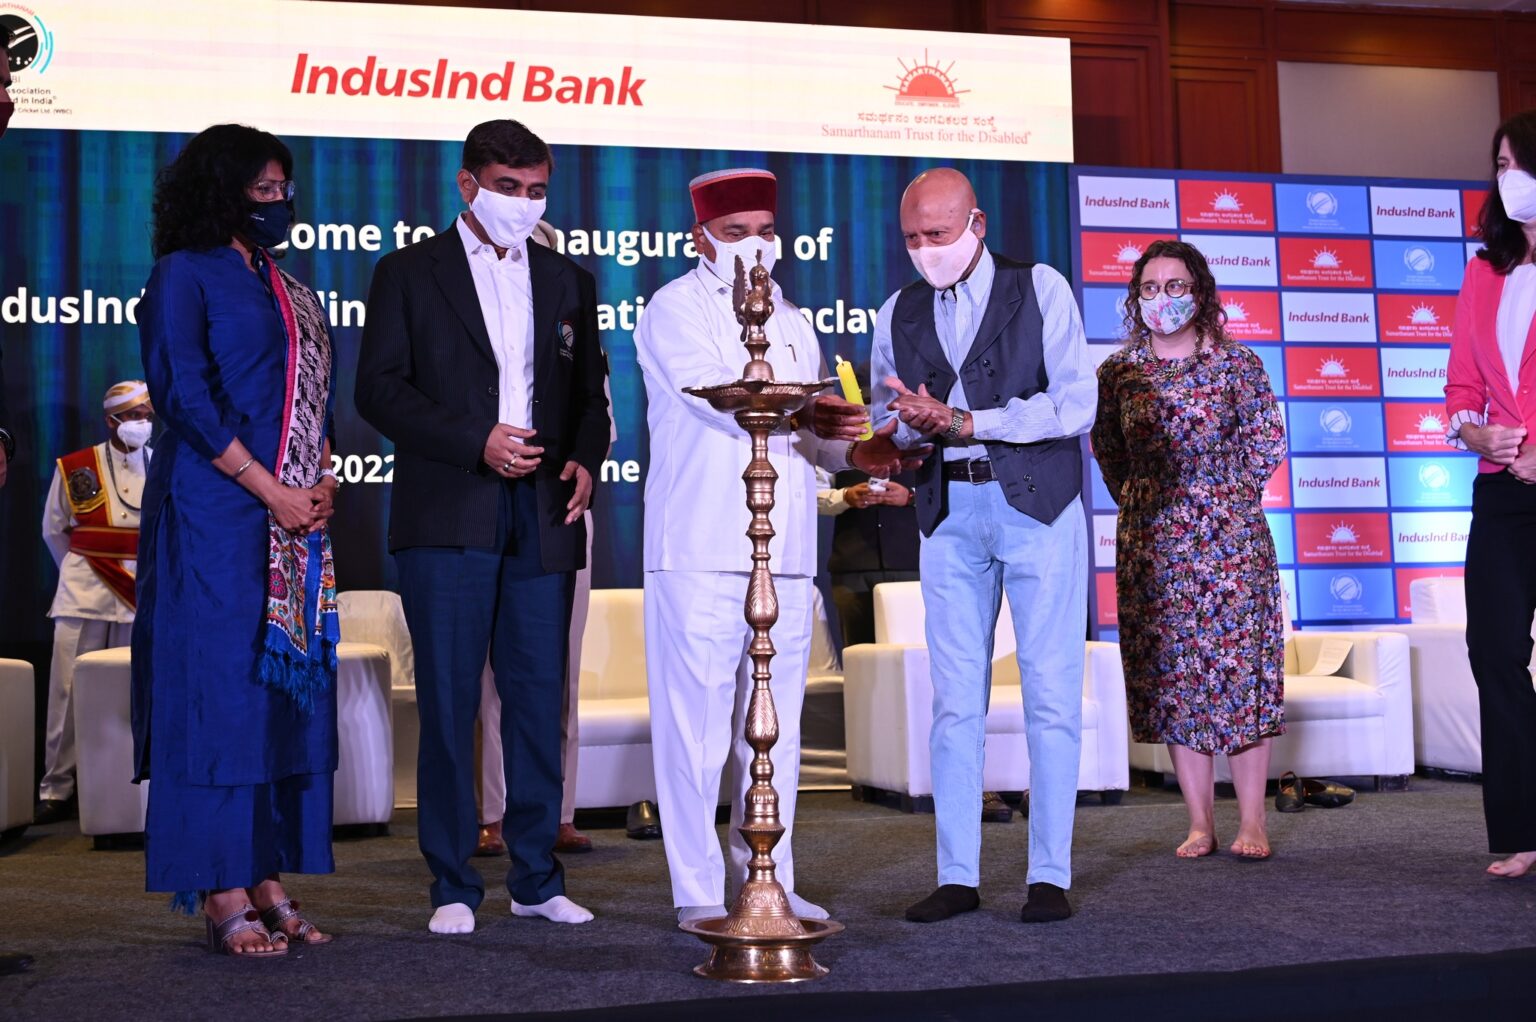 Hon’ble Governor of Karnataka Shri Thaawar Chand Gehlot inaugurated the IndusInd Bank Blind Cricket National Conclave -2022